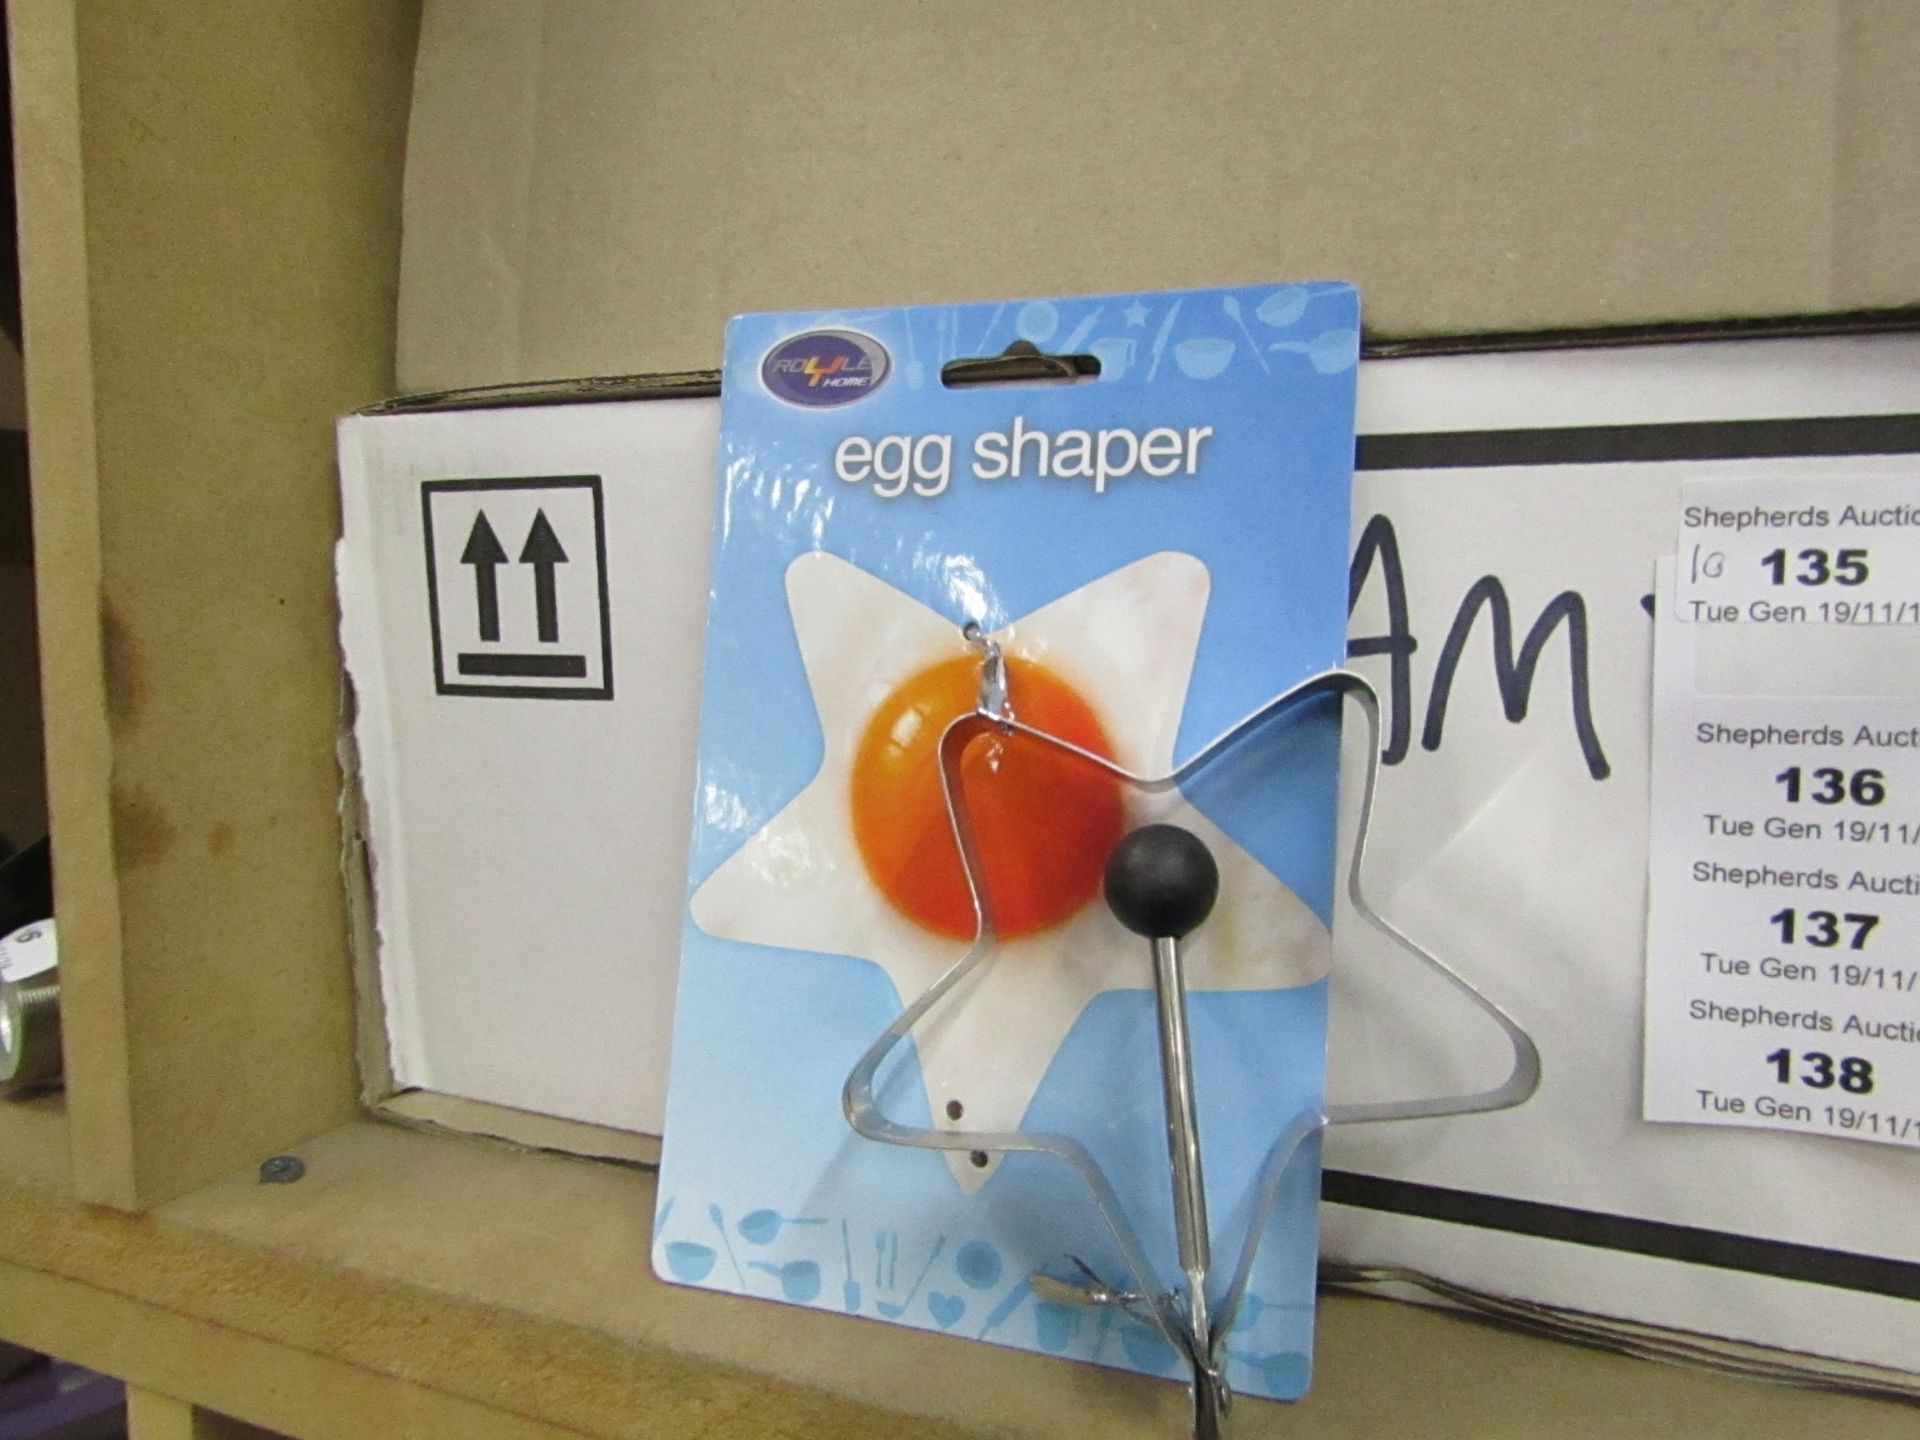 10x Egg Shapers new & packaged.